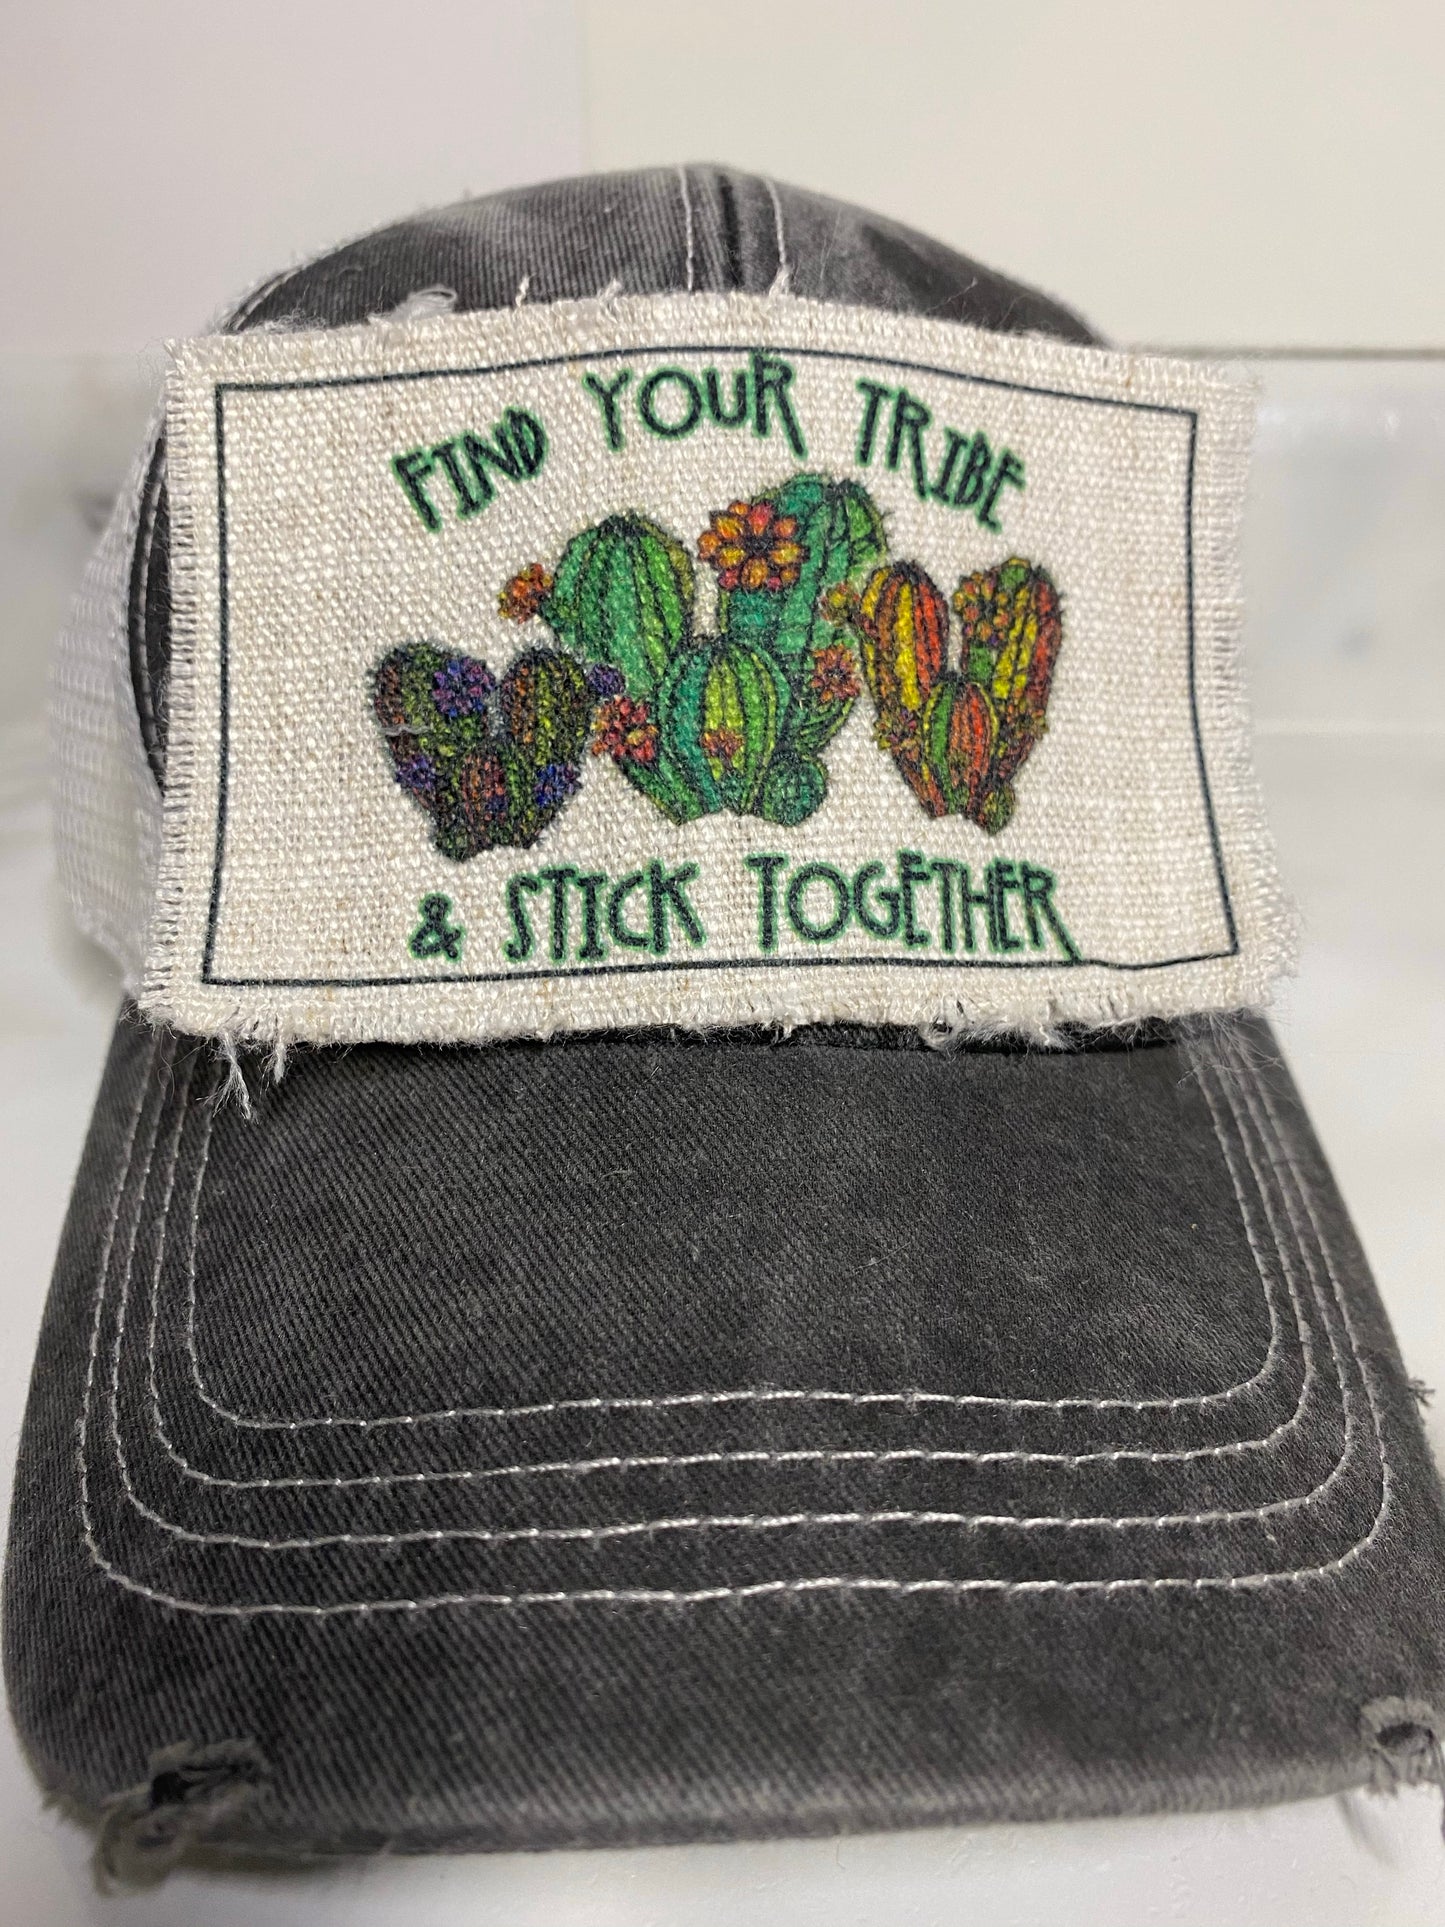 Find Your Tribe & Stick Together Hat Patch